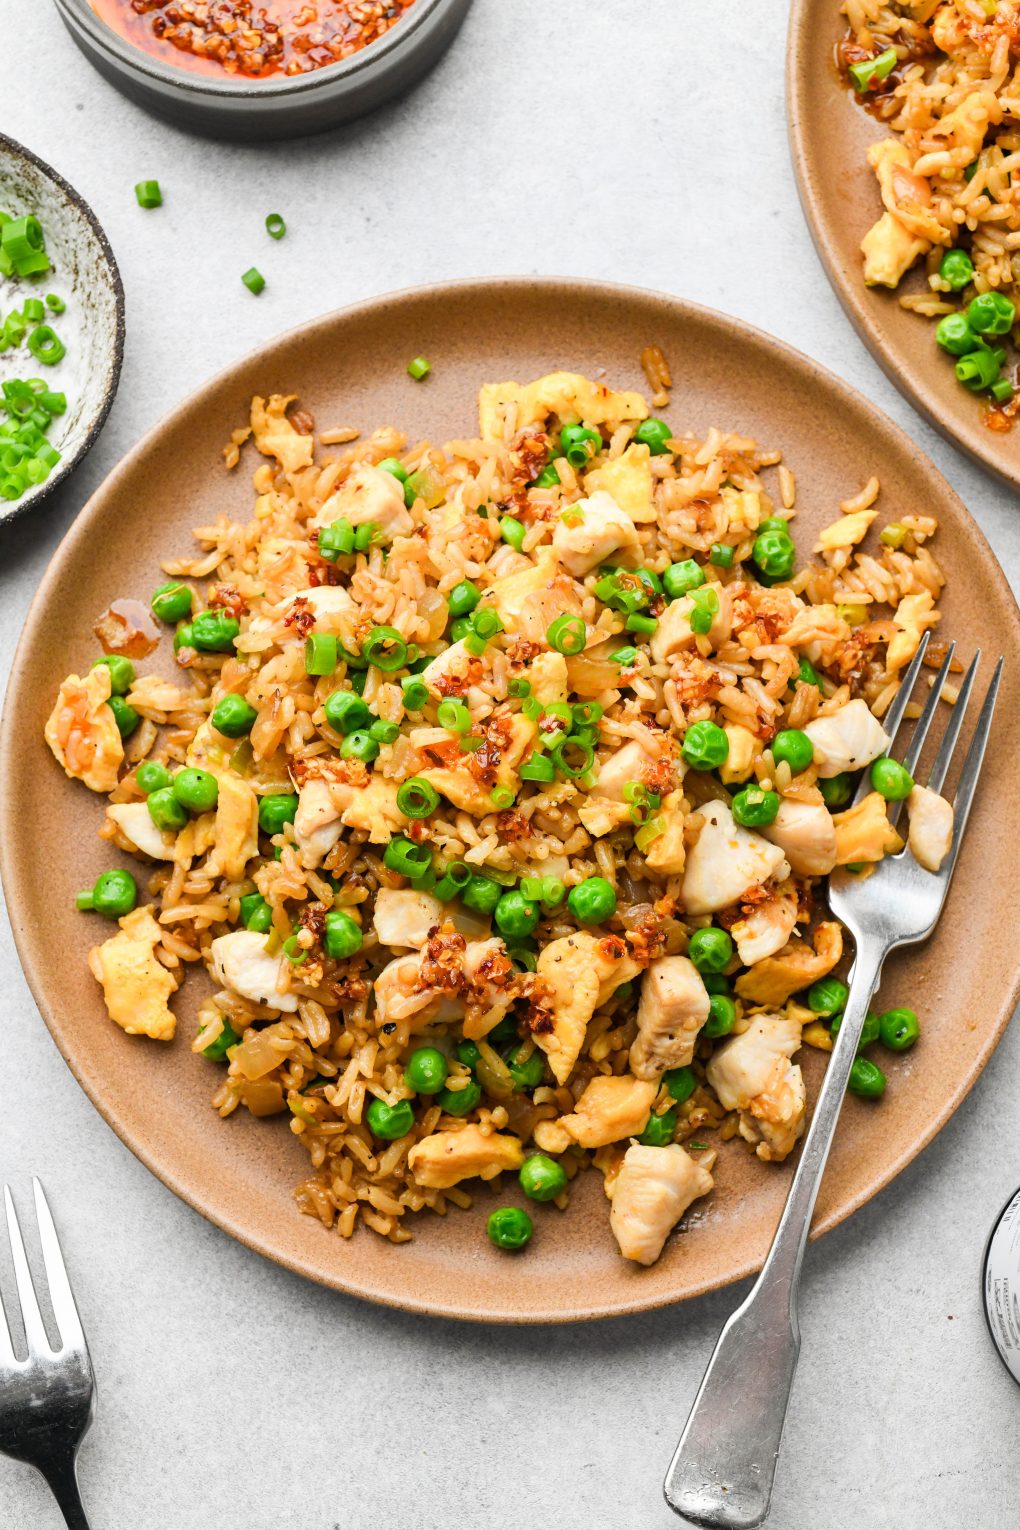 A plate of gluten free chicken fried rice garnished with green onions and chili oil, next to a second plate, a small dish of green onions, a bowl of chili oil, and two forks.